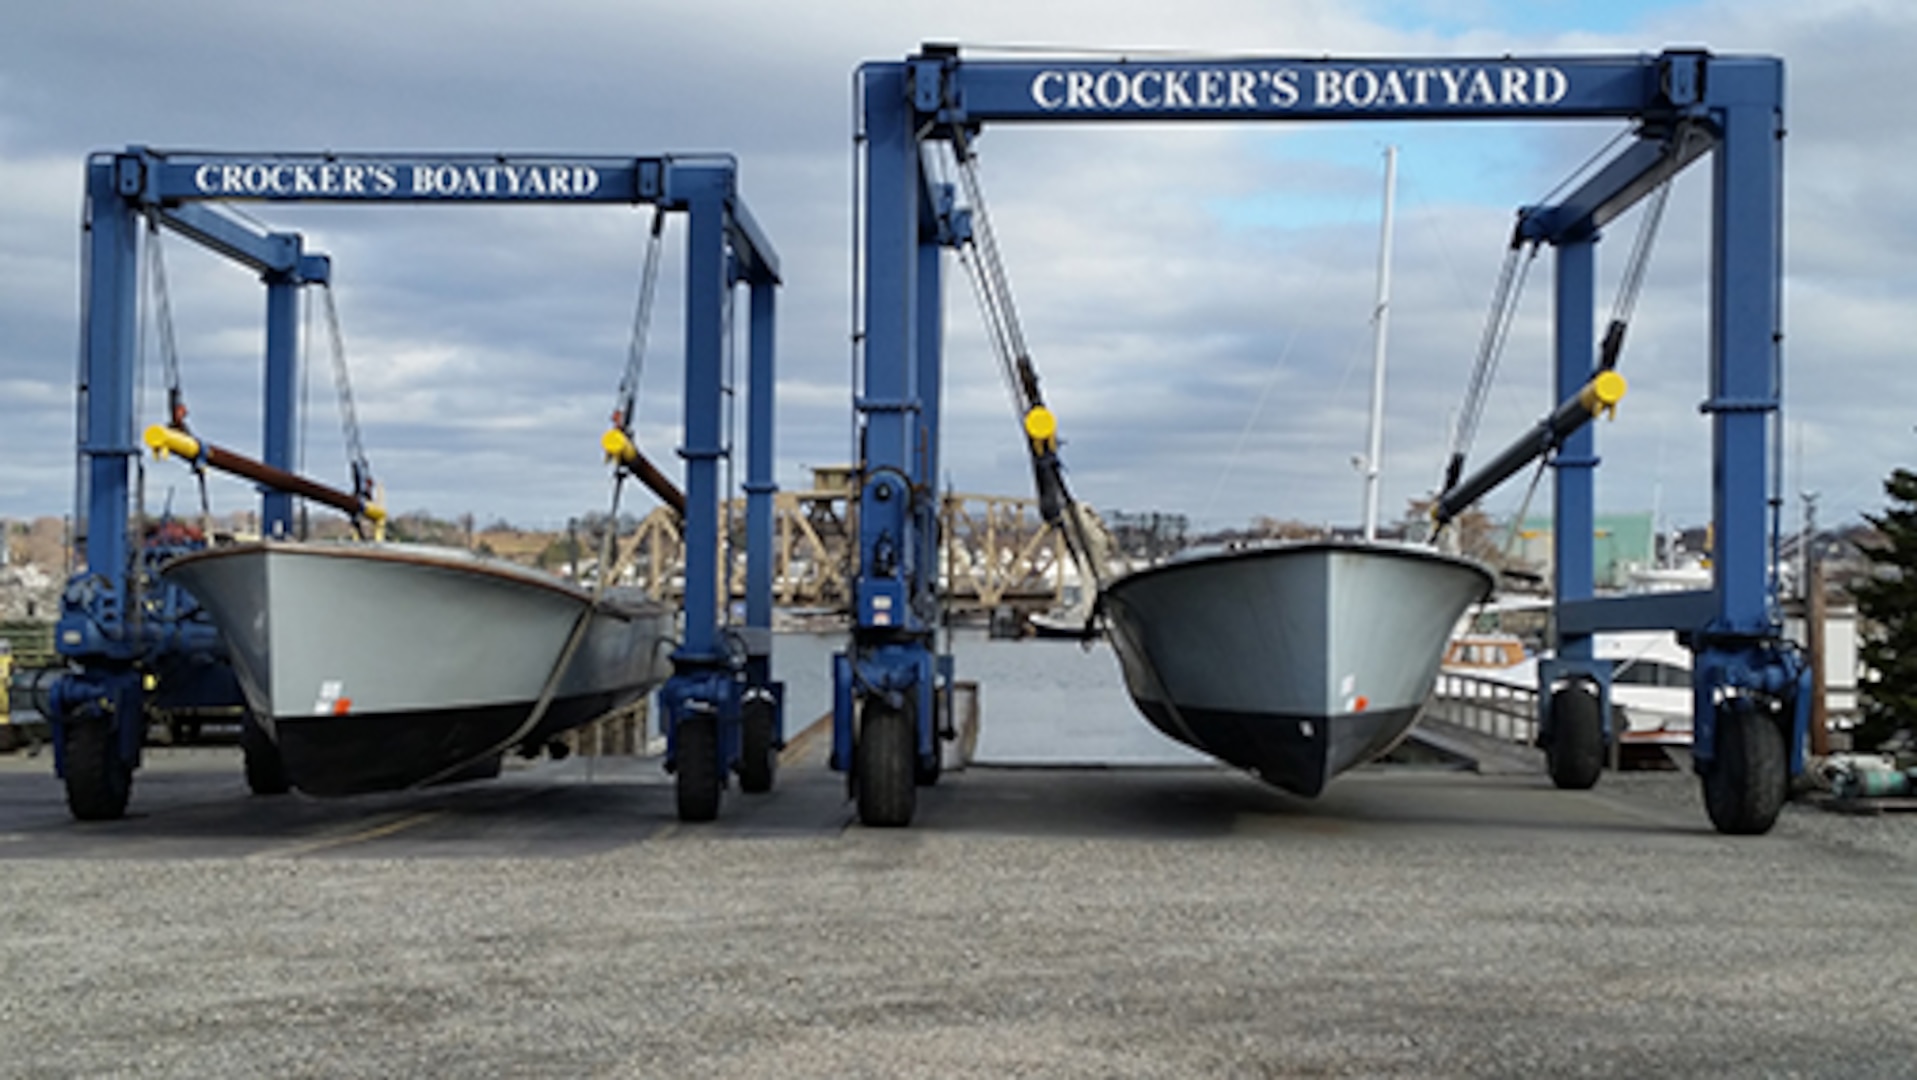 Former Navy utility boat boats arrived in New London, Connecticut, via tractor-trailer Nov. 30. The surplus watercraft will be used to ferry passengers between historical sites along the Thames River as part of the new "Thames River Heritage Park" effort there. Photo courtesy of City of Groton, Connecticut.